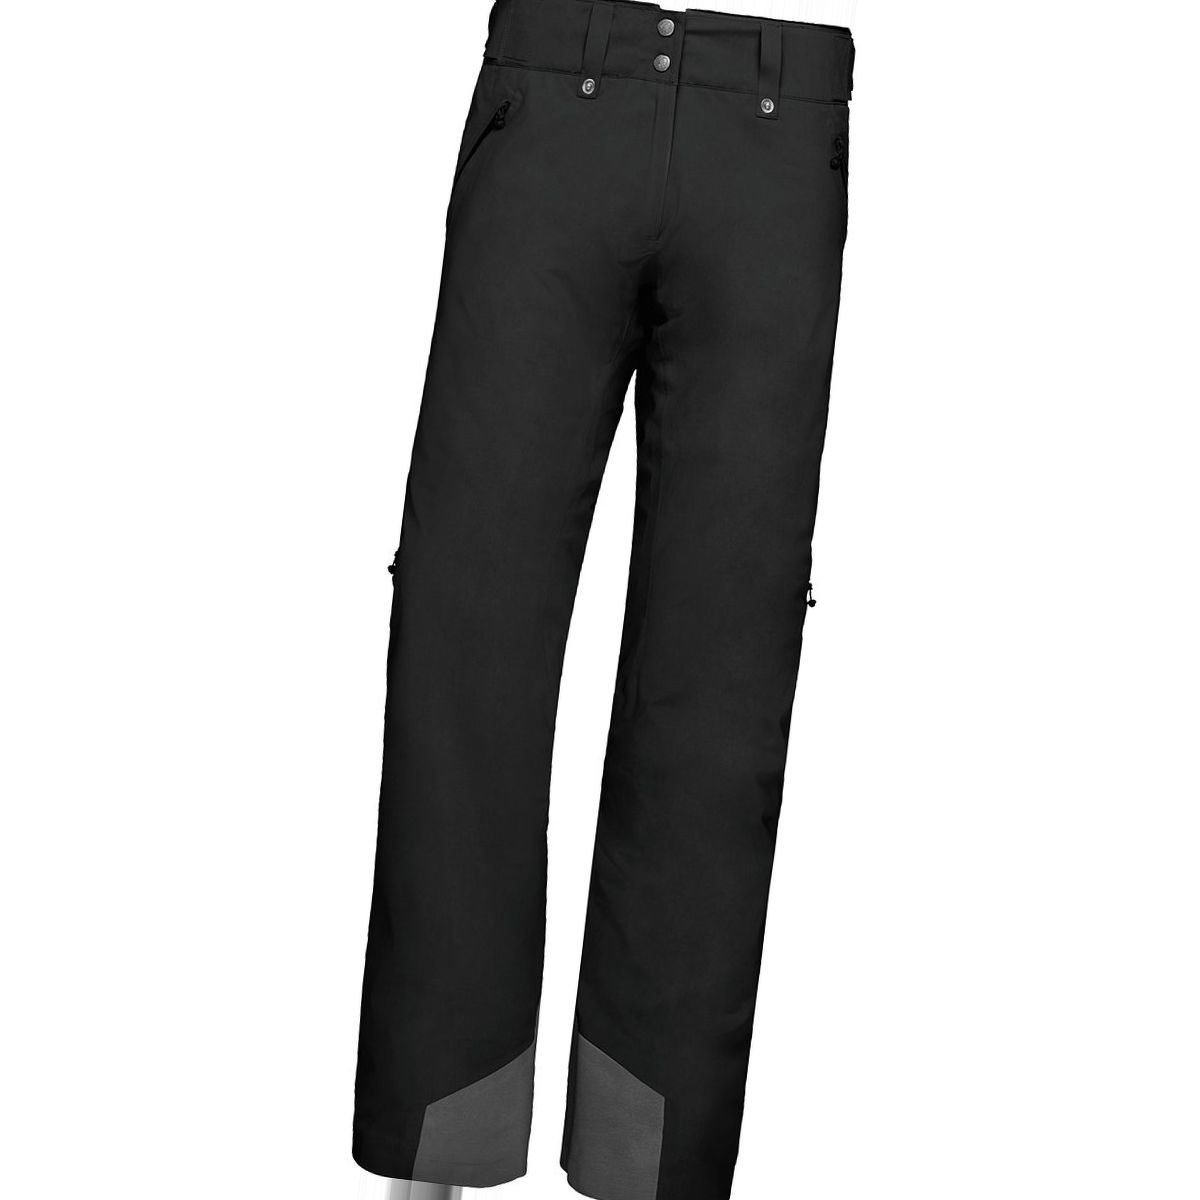 Norrona Roldal Gore-Tex Insulated Pant - Men's